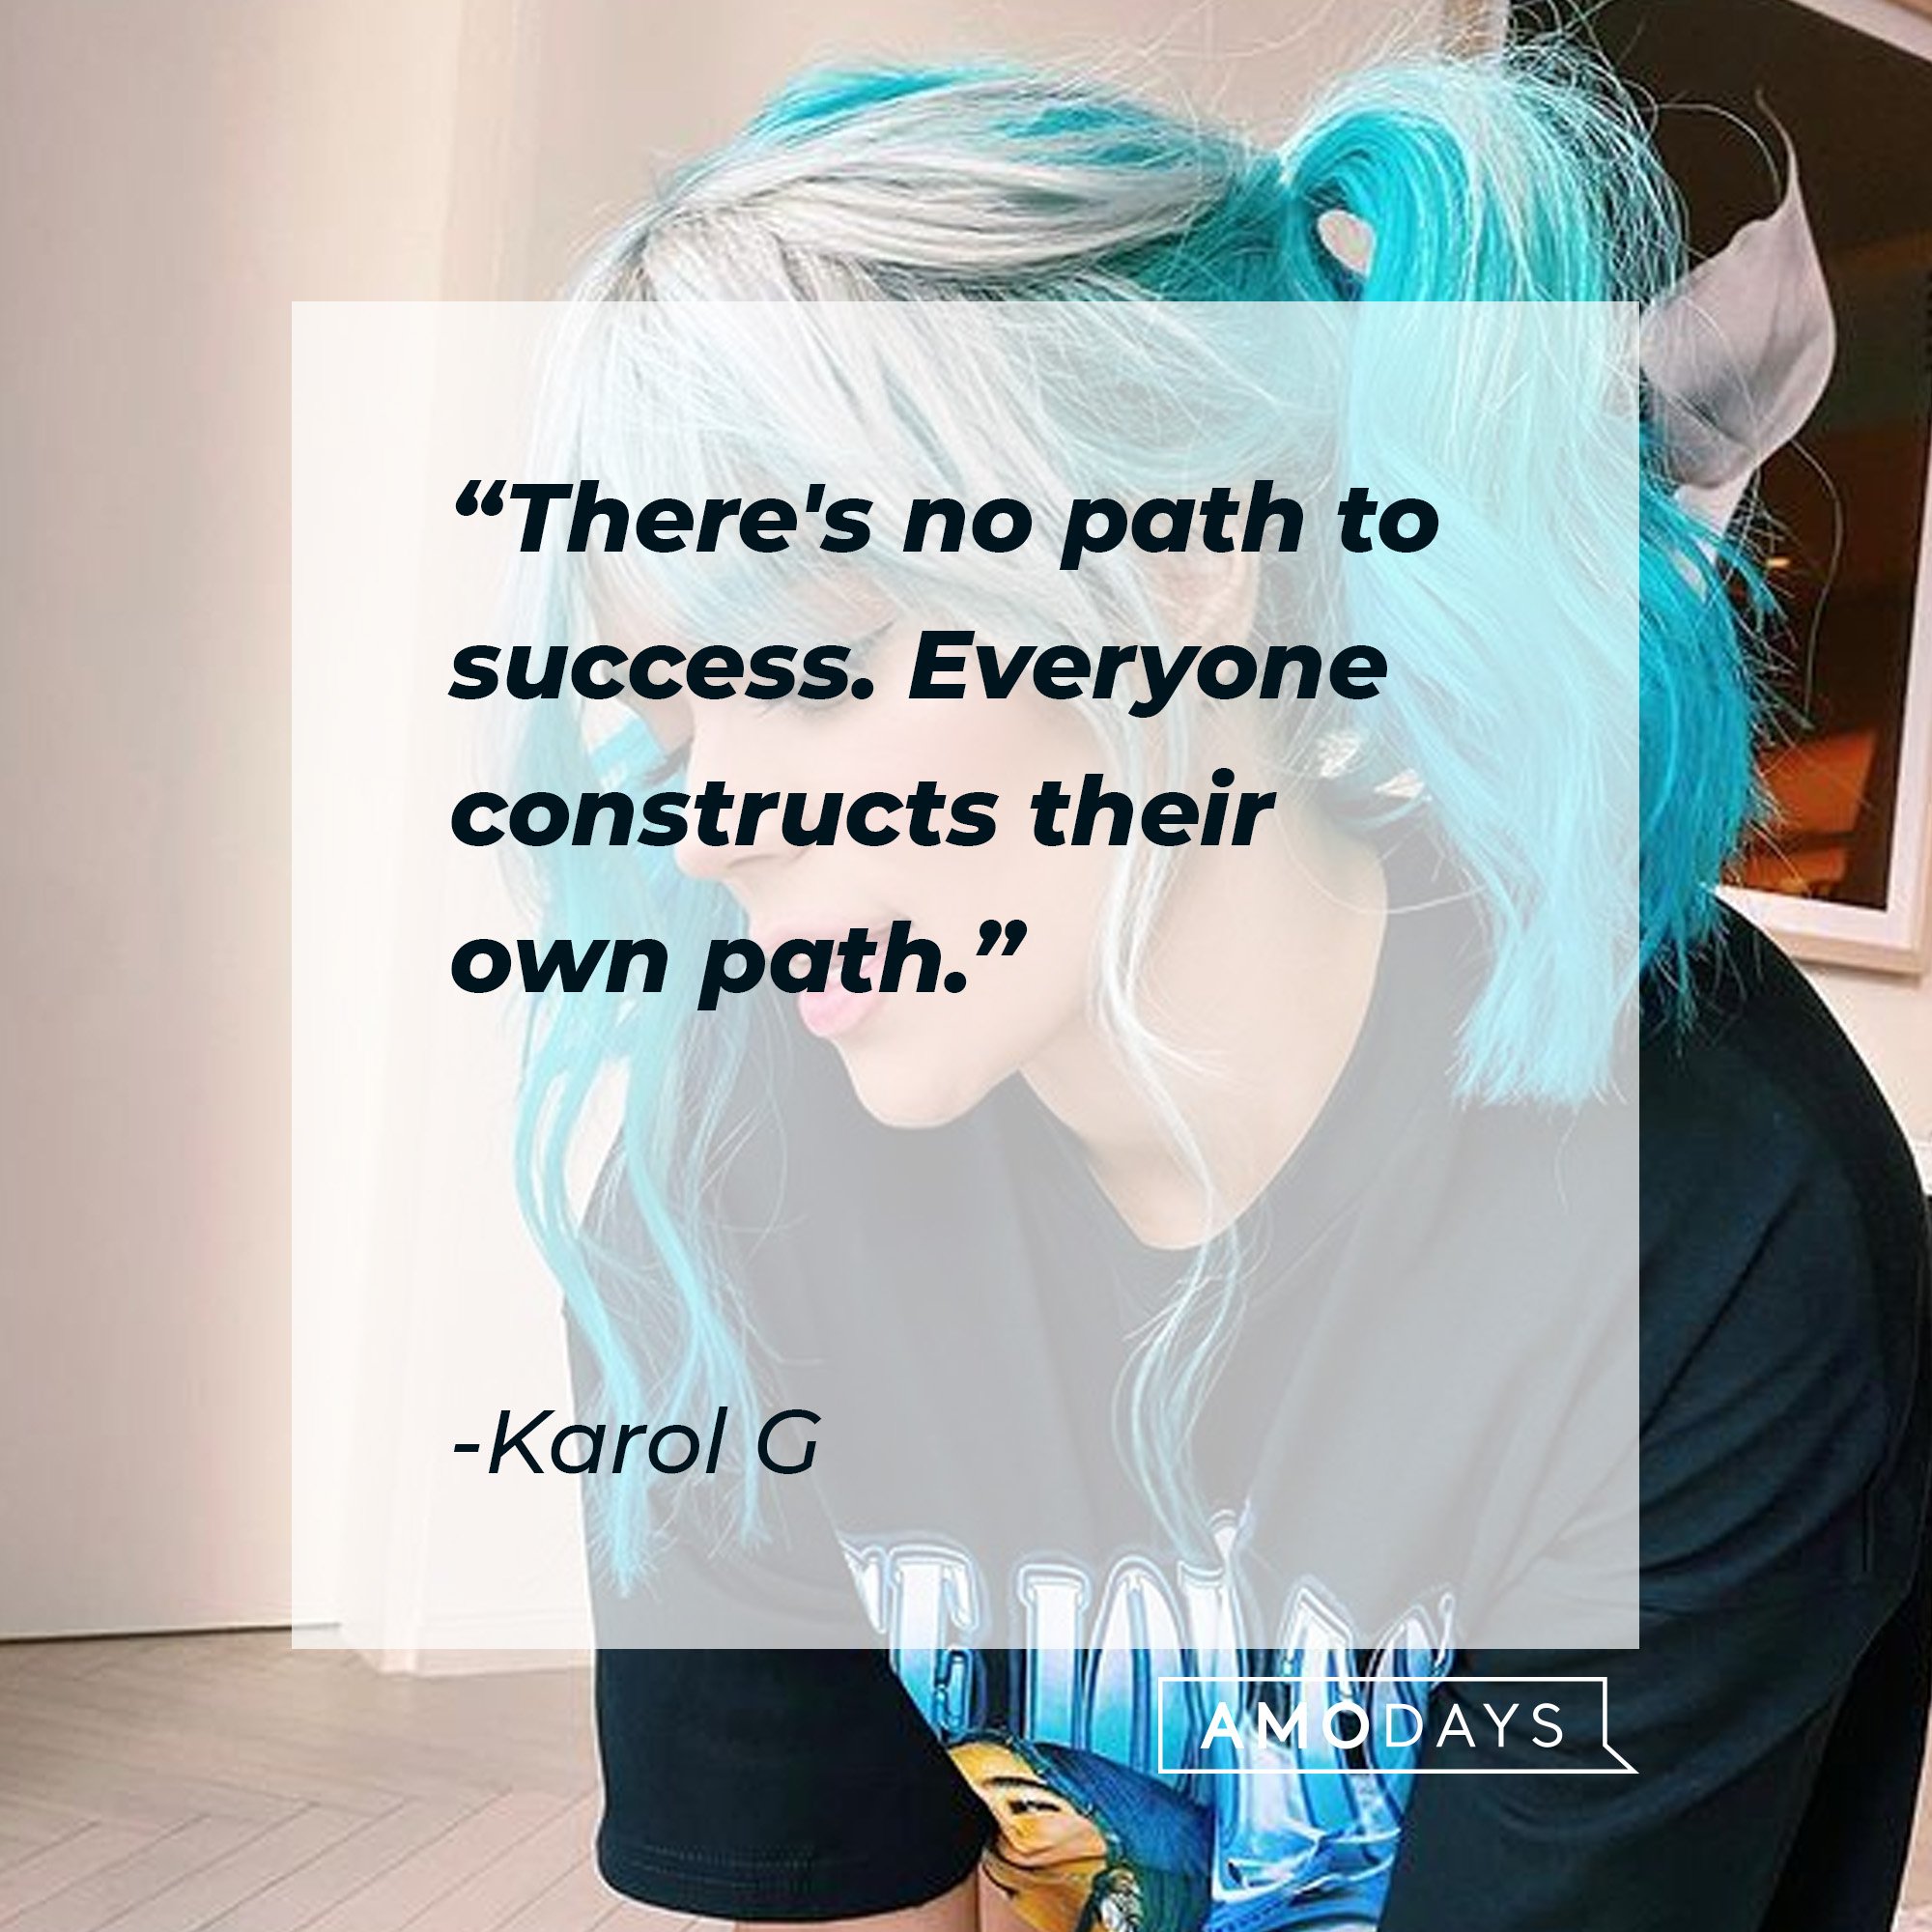 Karol G’s quote: “There's no path to success. Everyone constructs their own path." | Image: AmoDays